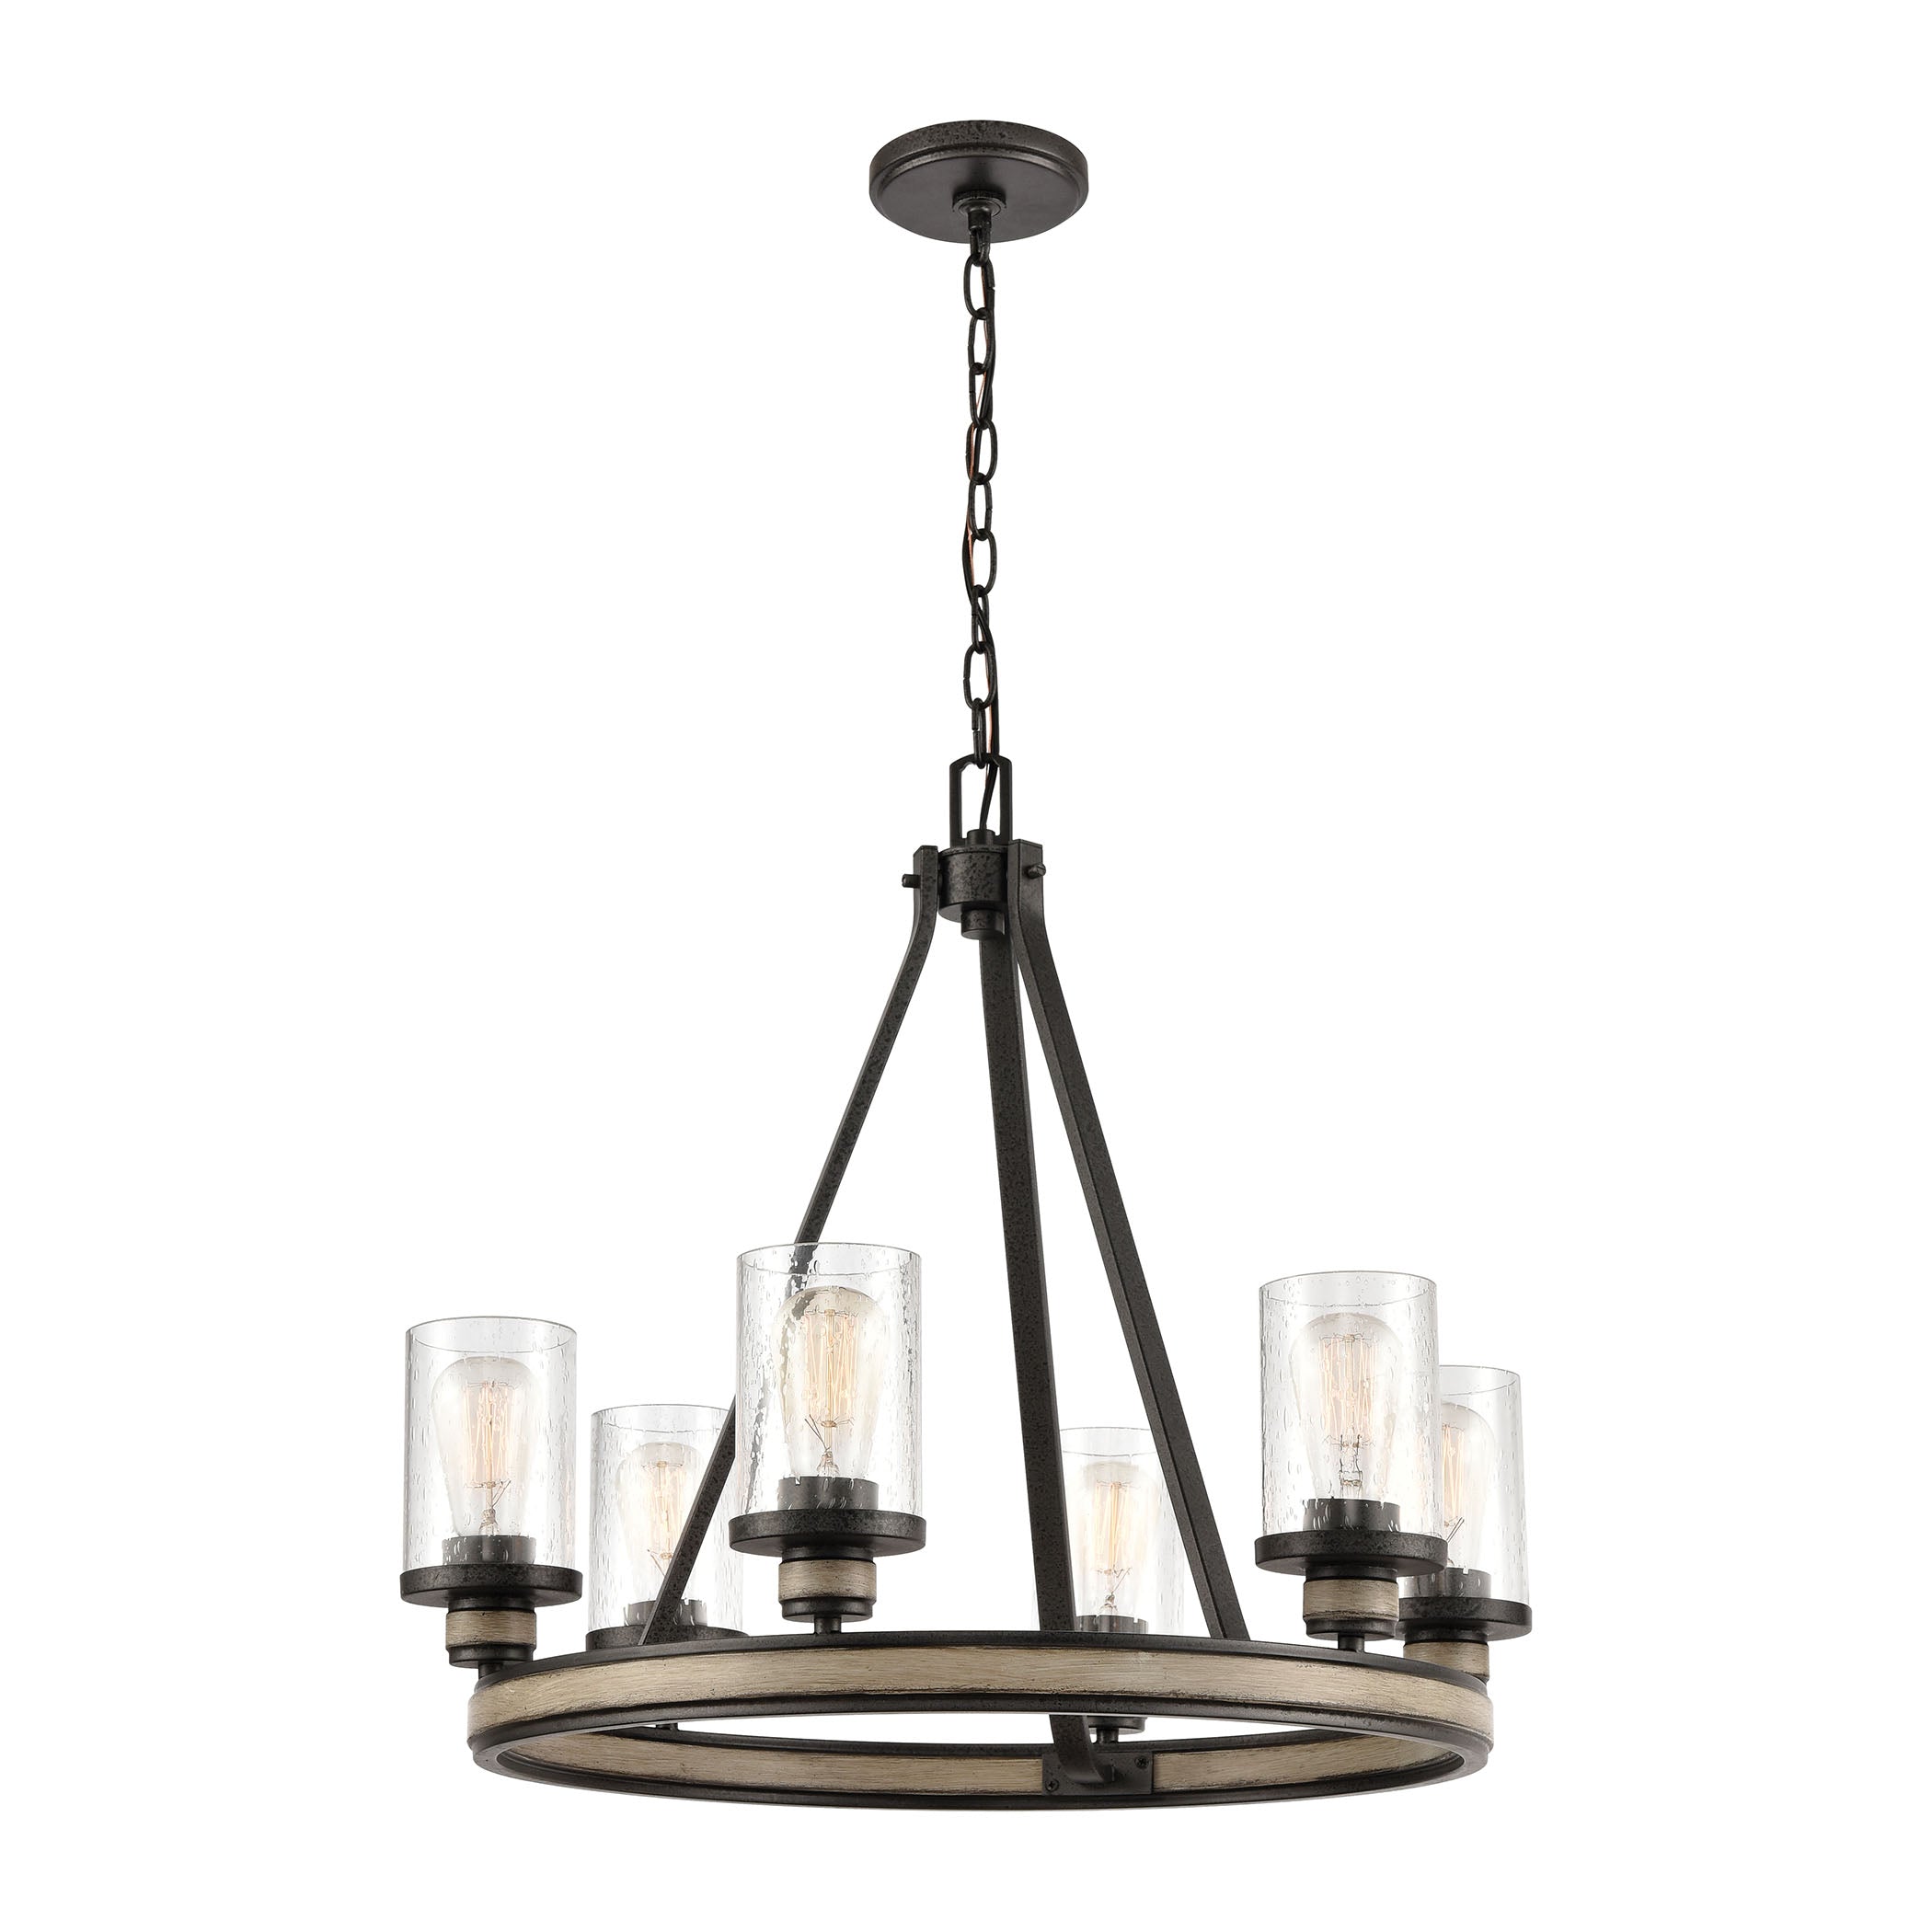 ELK Lighting 89159/6 Beaufort 6-Light Chandelier in Anvil Iron and Distressed Antique Graywood with Seedy Glass